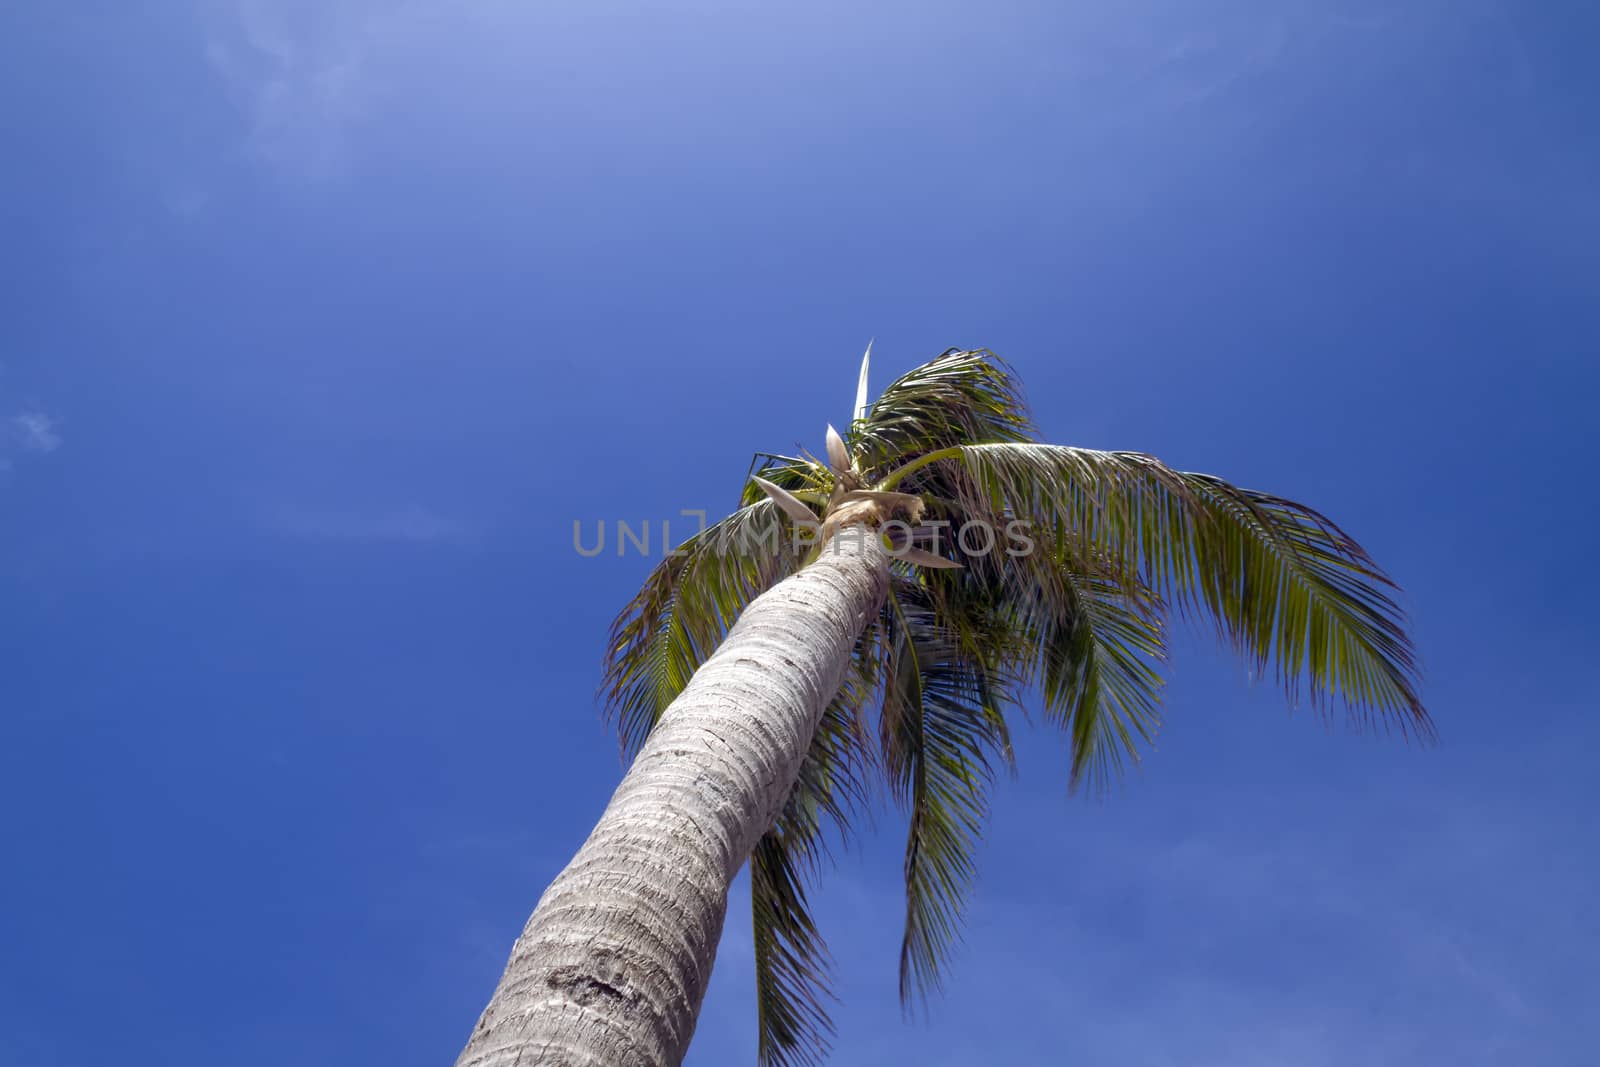 A palm tree blowing in the wind with a blue cloudy sky 